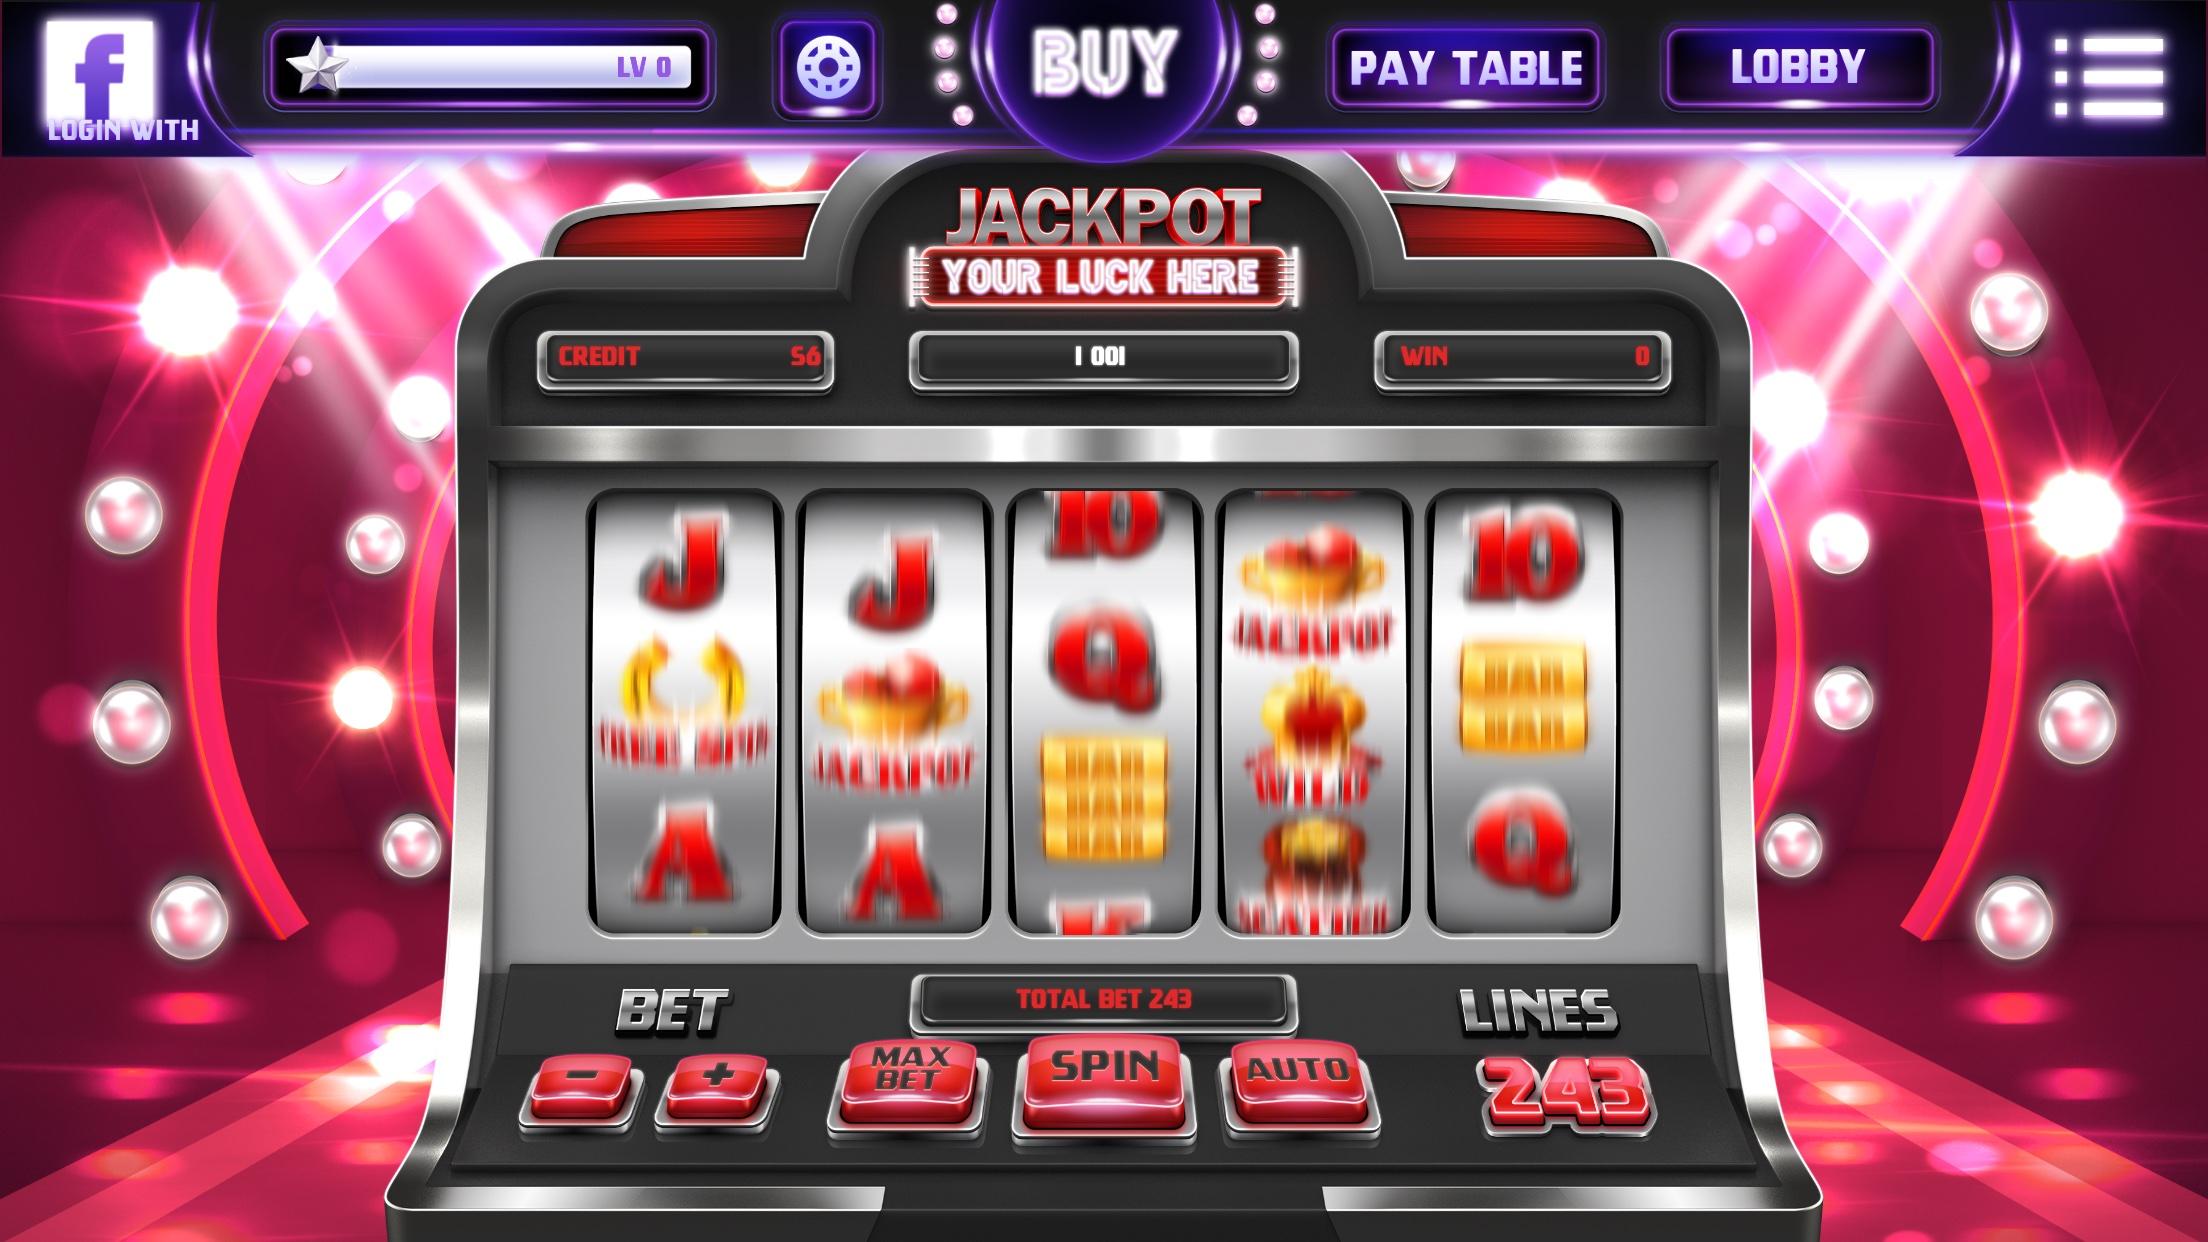 Android 向 け の Metal Slots APK を ダ ウ ン ロ-ド し ま し ょ う